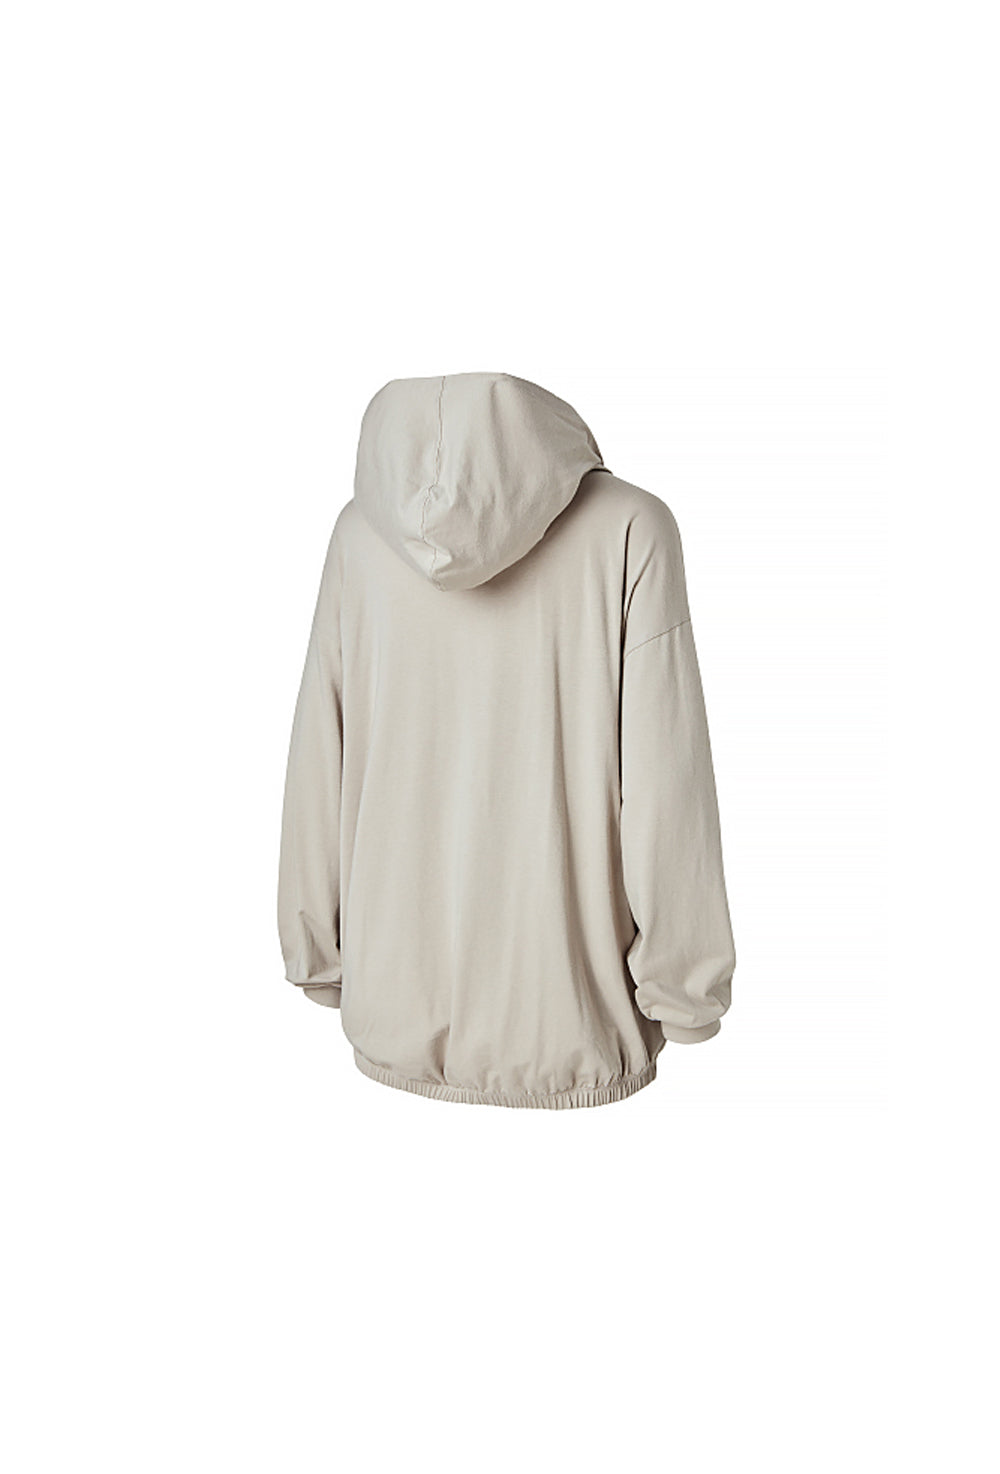 Loose Fit Cover-up Hood - Natural Gray (Clearance)